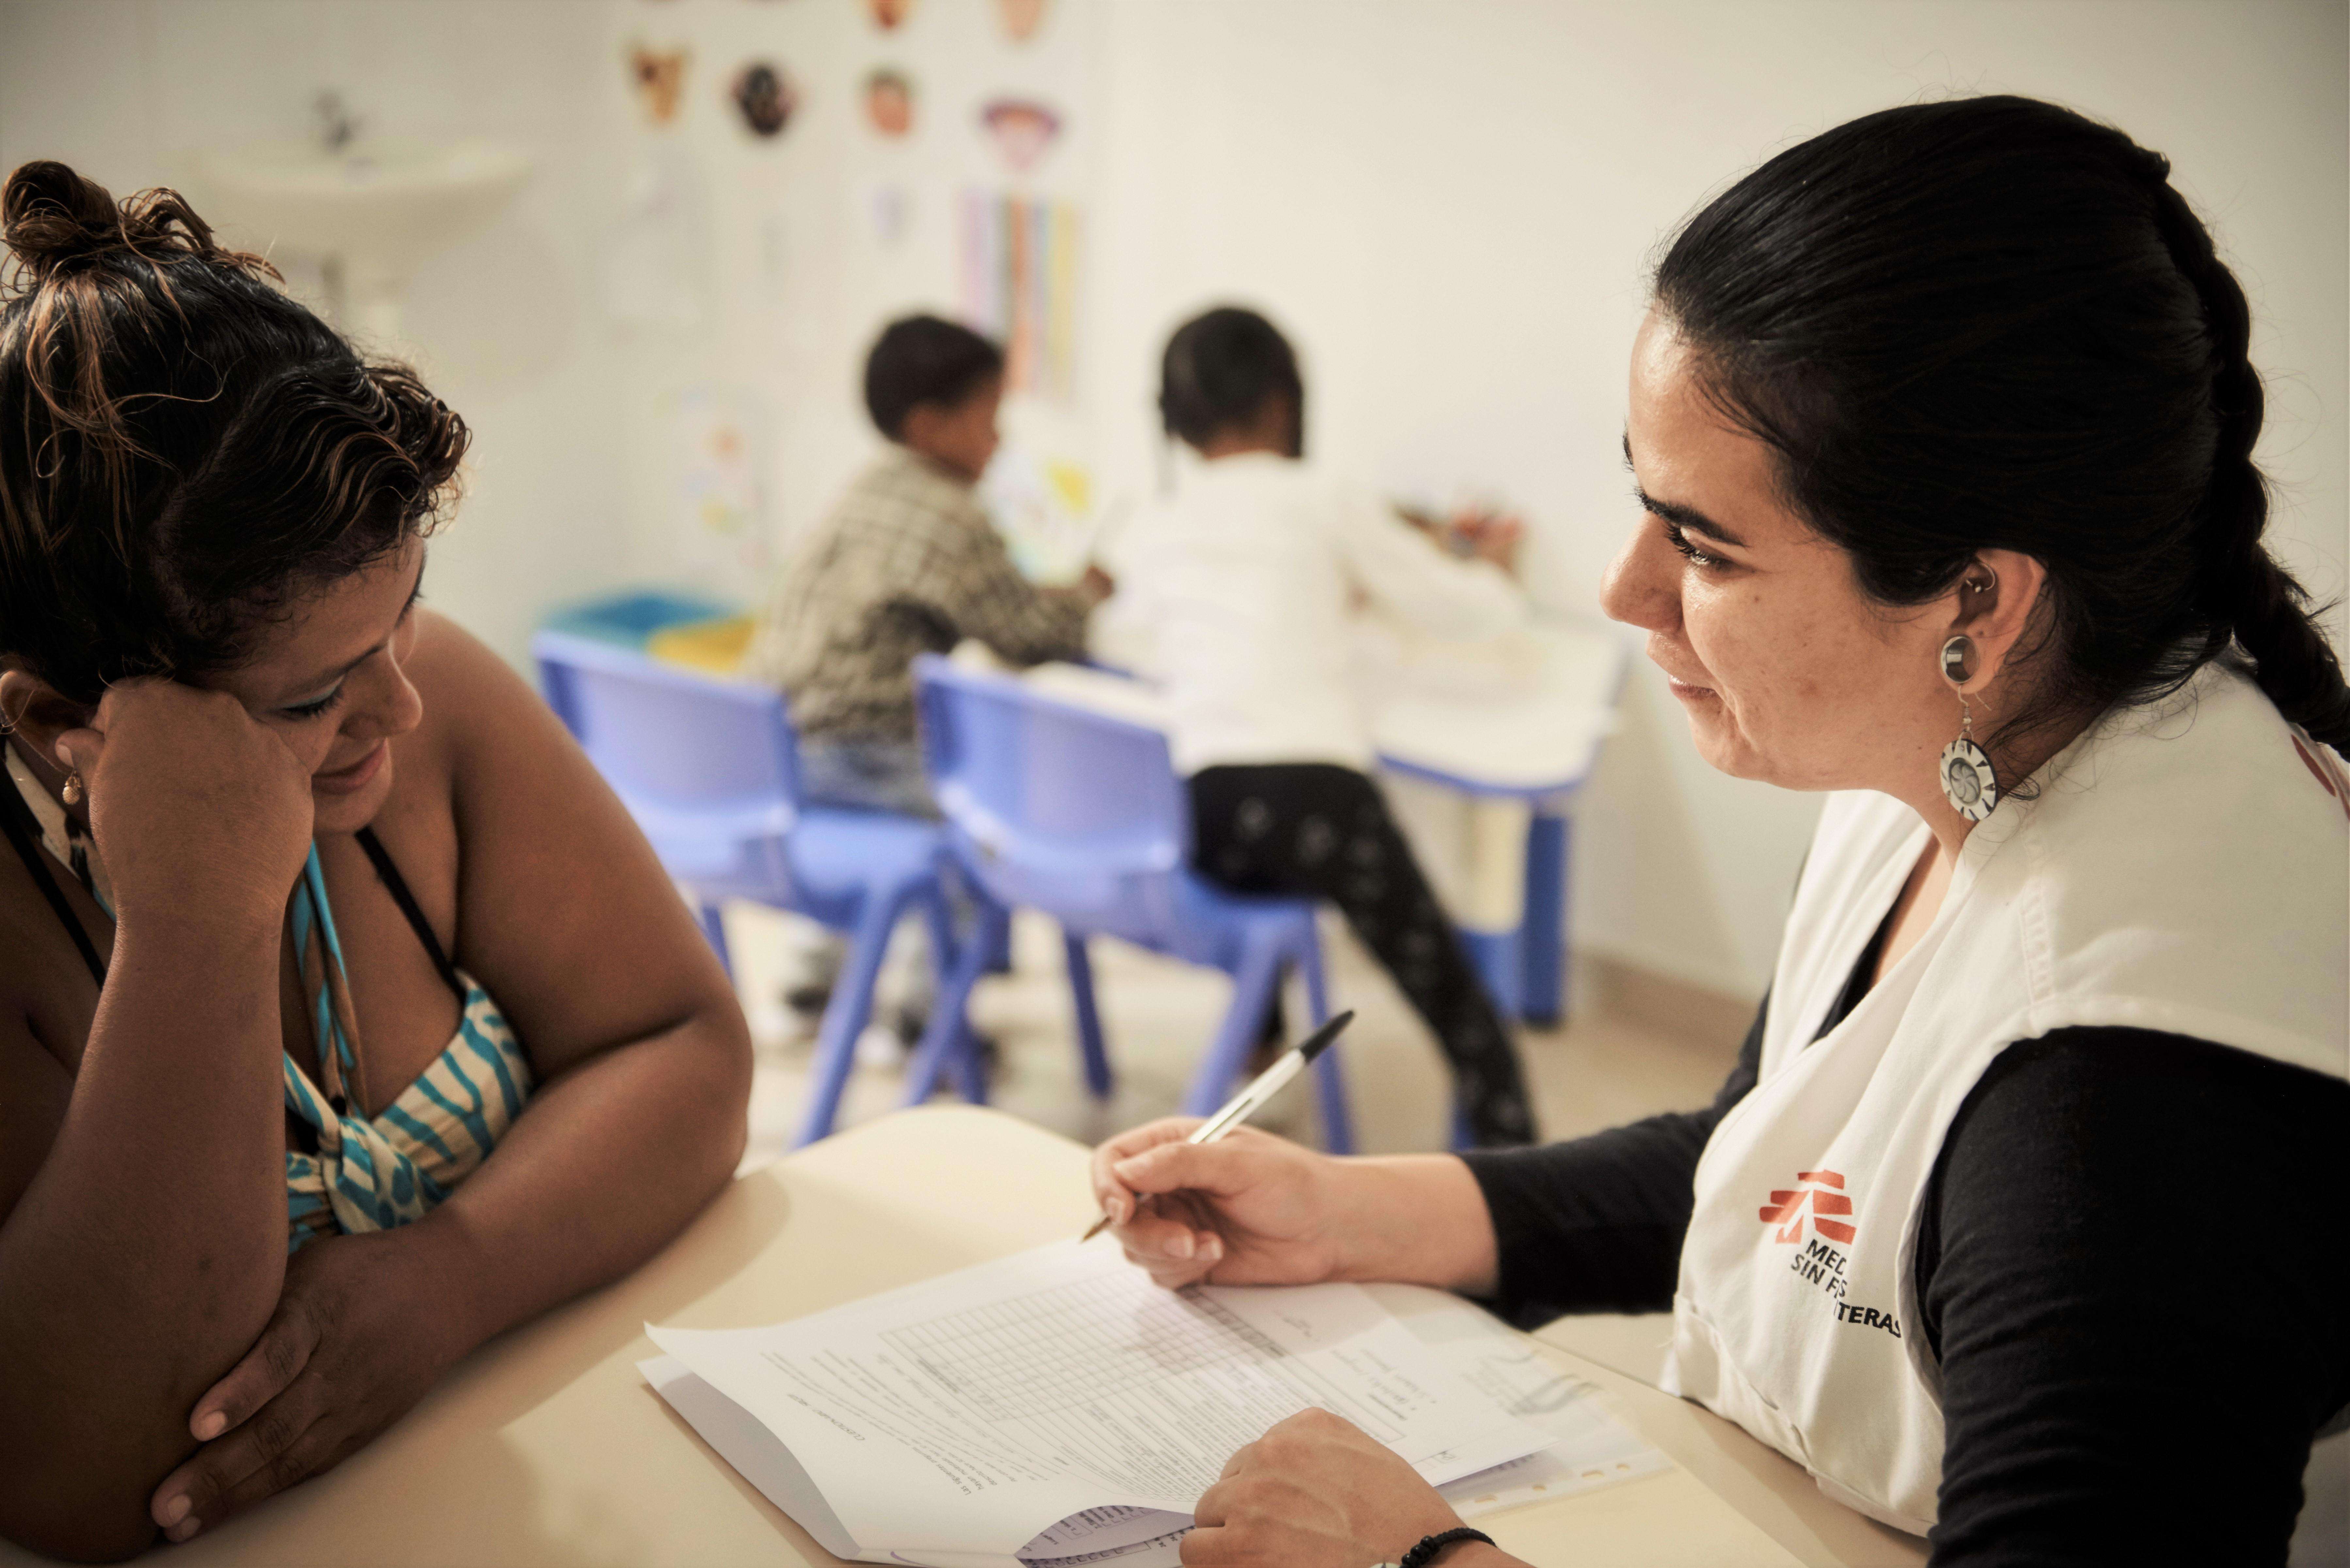 An MSF psychologist treats a patient at a health centre in Nueva Capital, a neighborhood on the outskirts of Tegucigalpa, Honduras. 